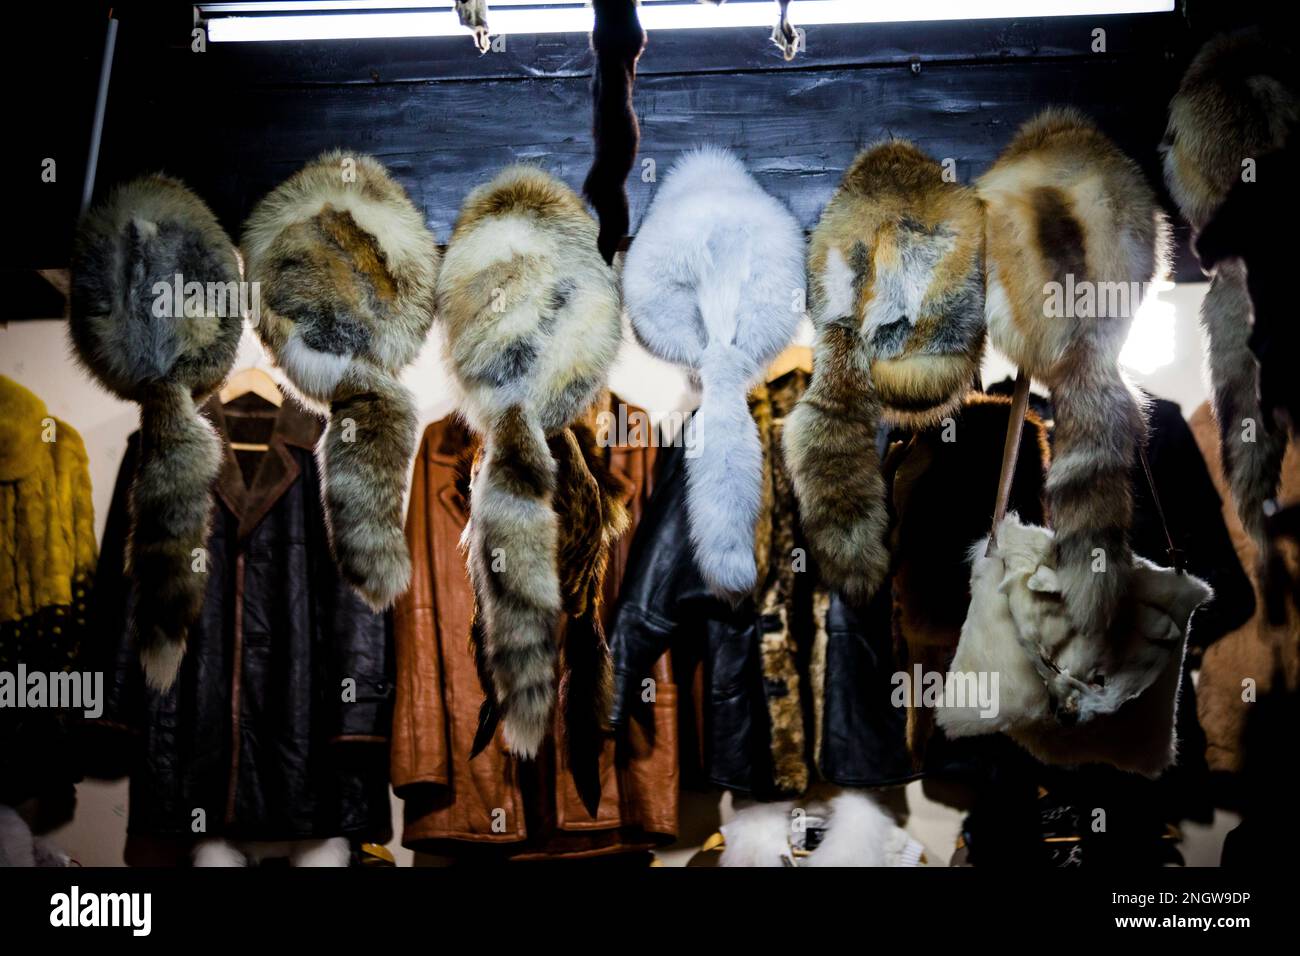 real fur clothing made from animals in china market Stock Photo